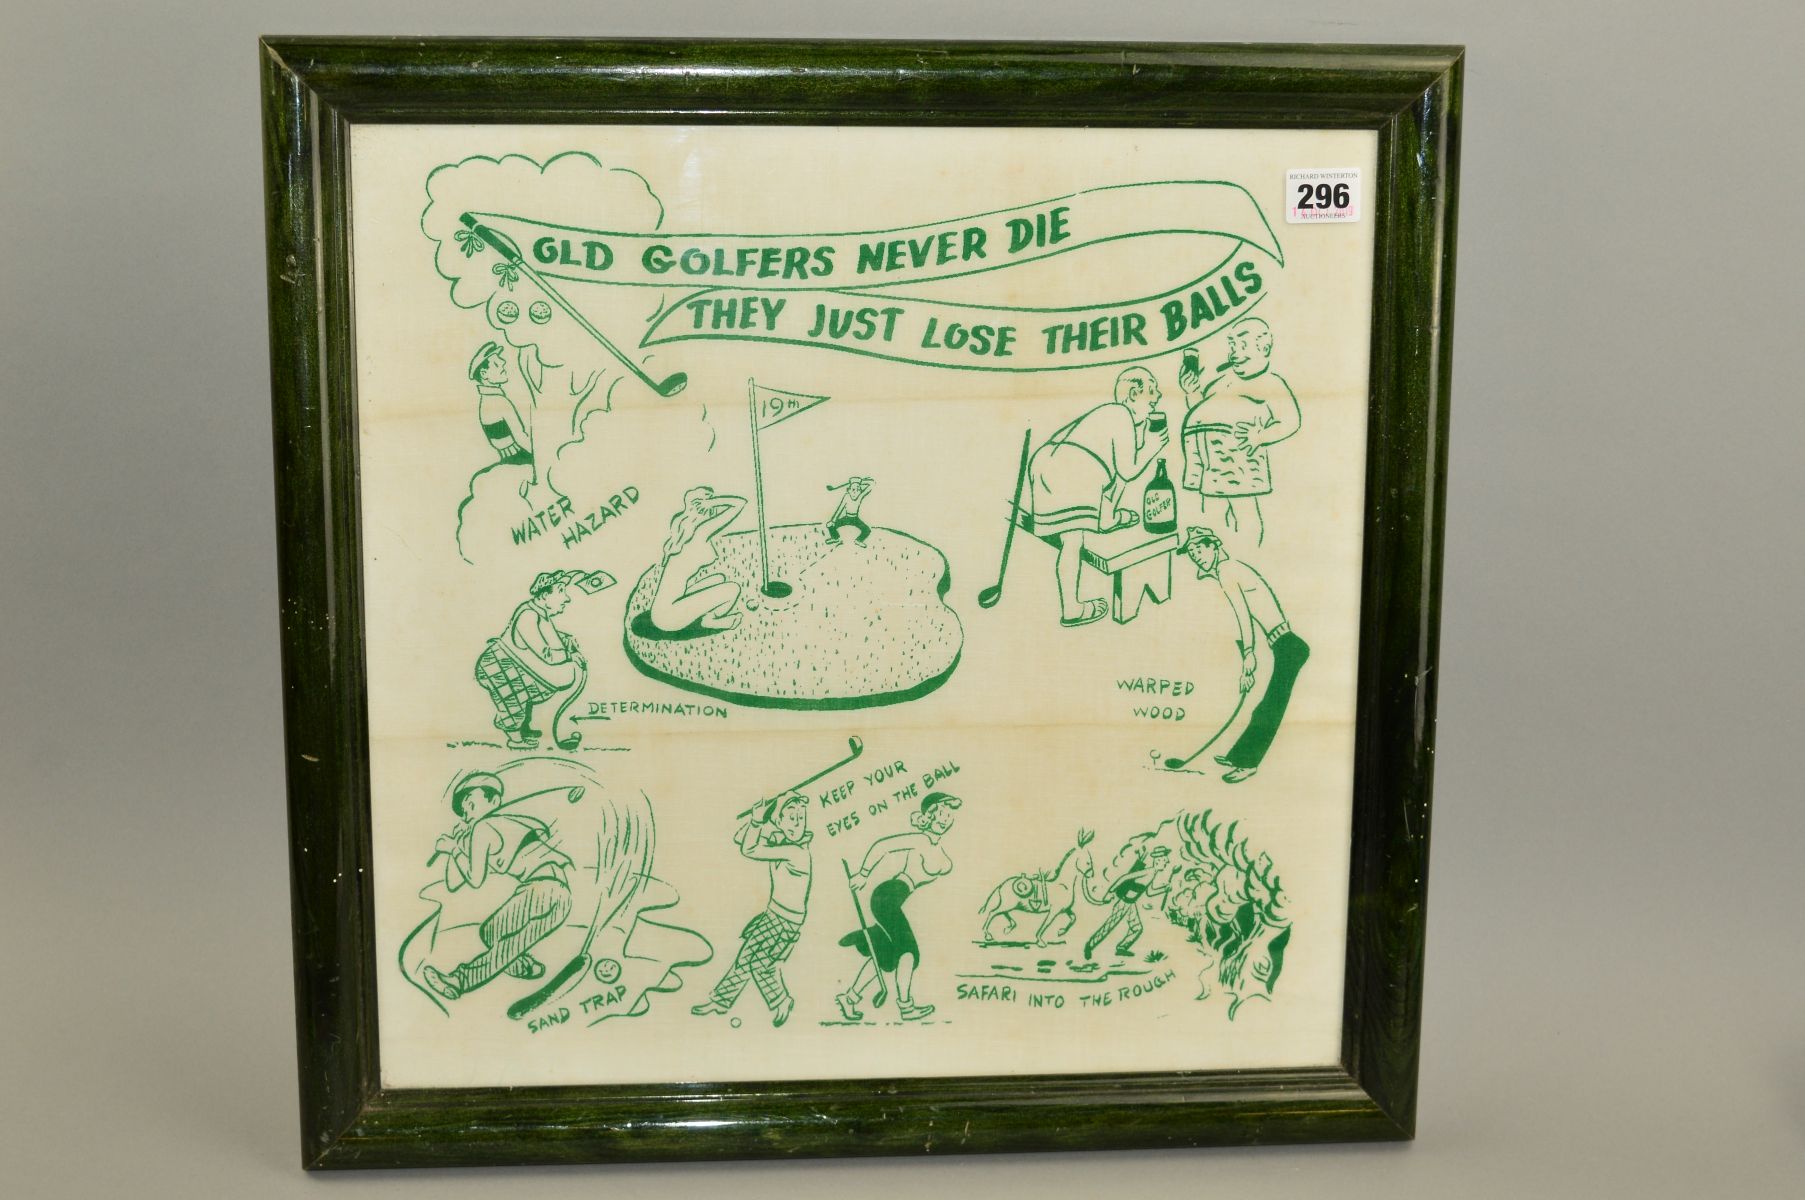 FRAMED GREEN AND WHITE LINEN WITH CARICATURES OF GOLFING SCENES, and captioned 'Old Golfers never